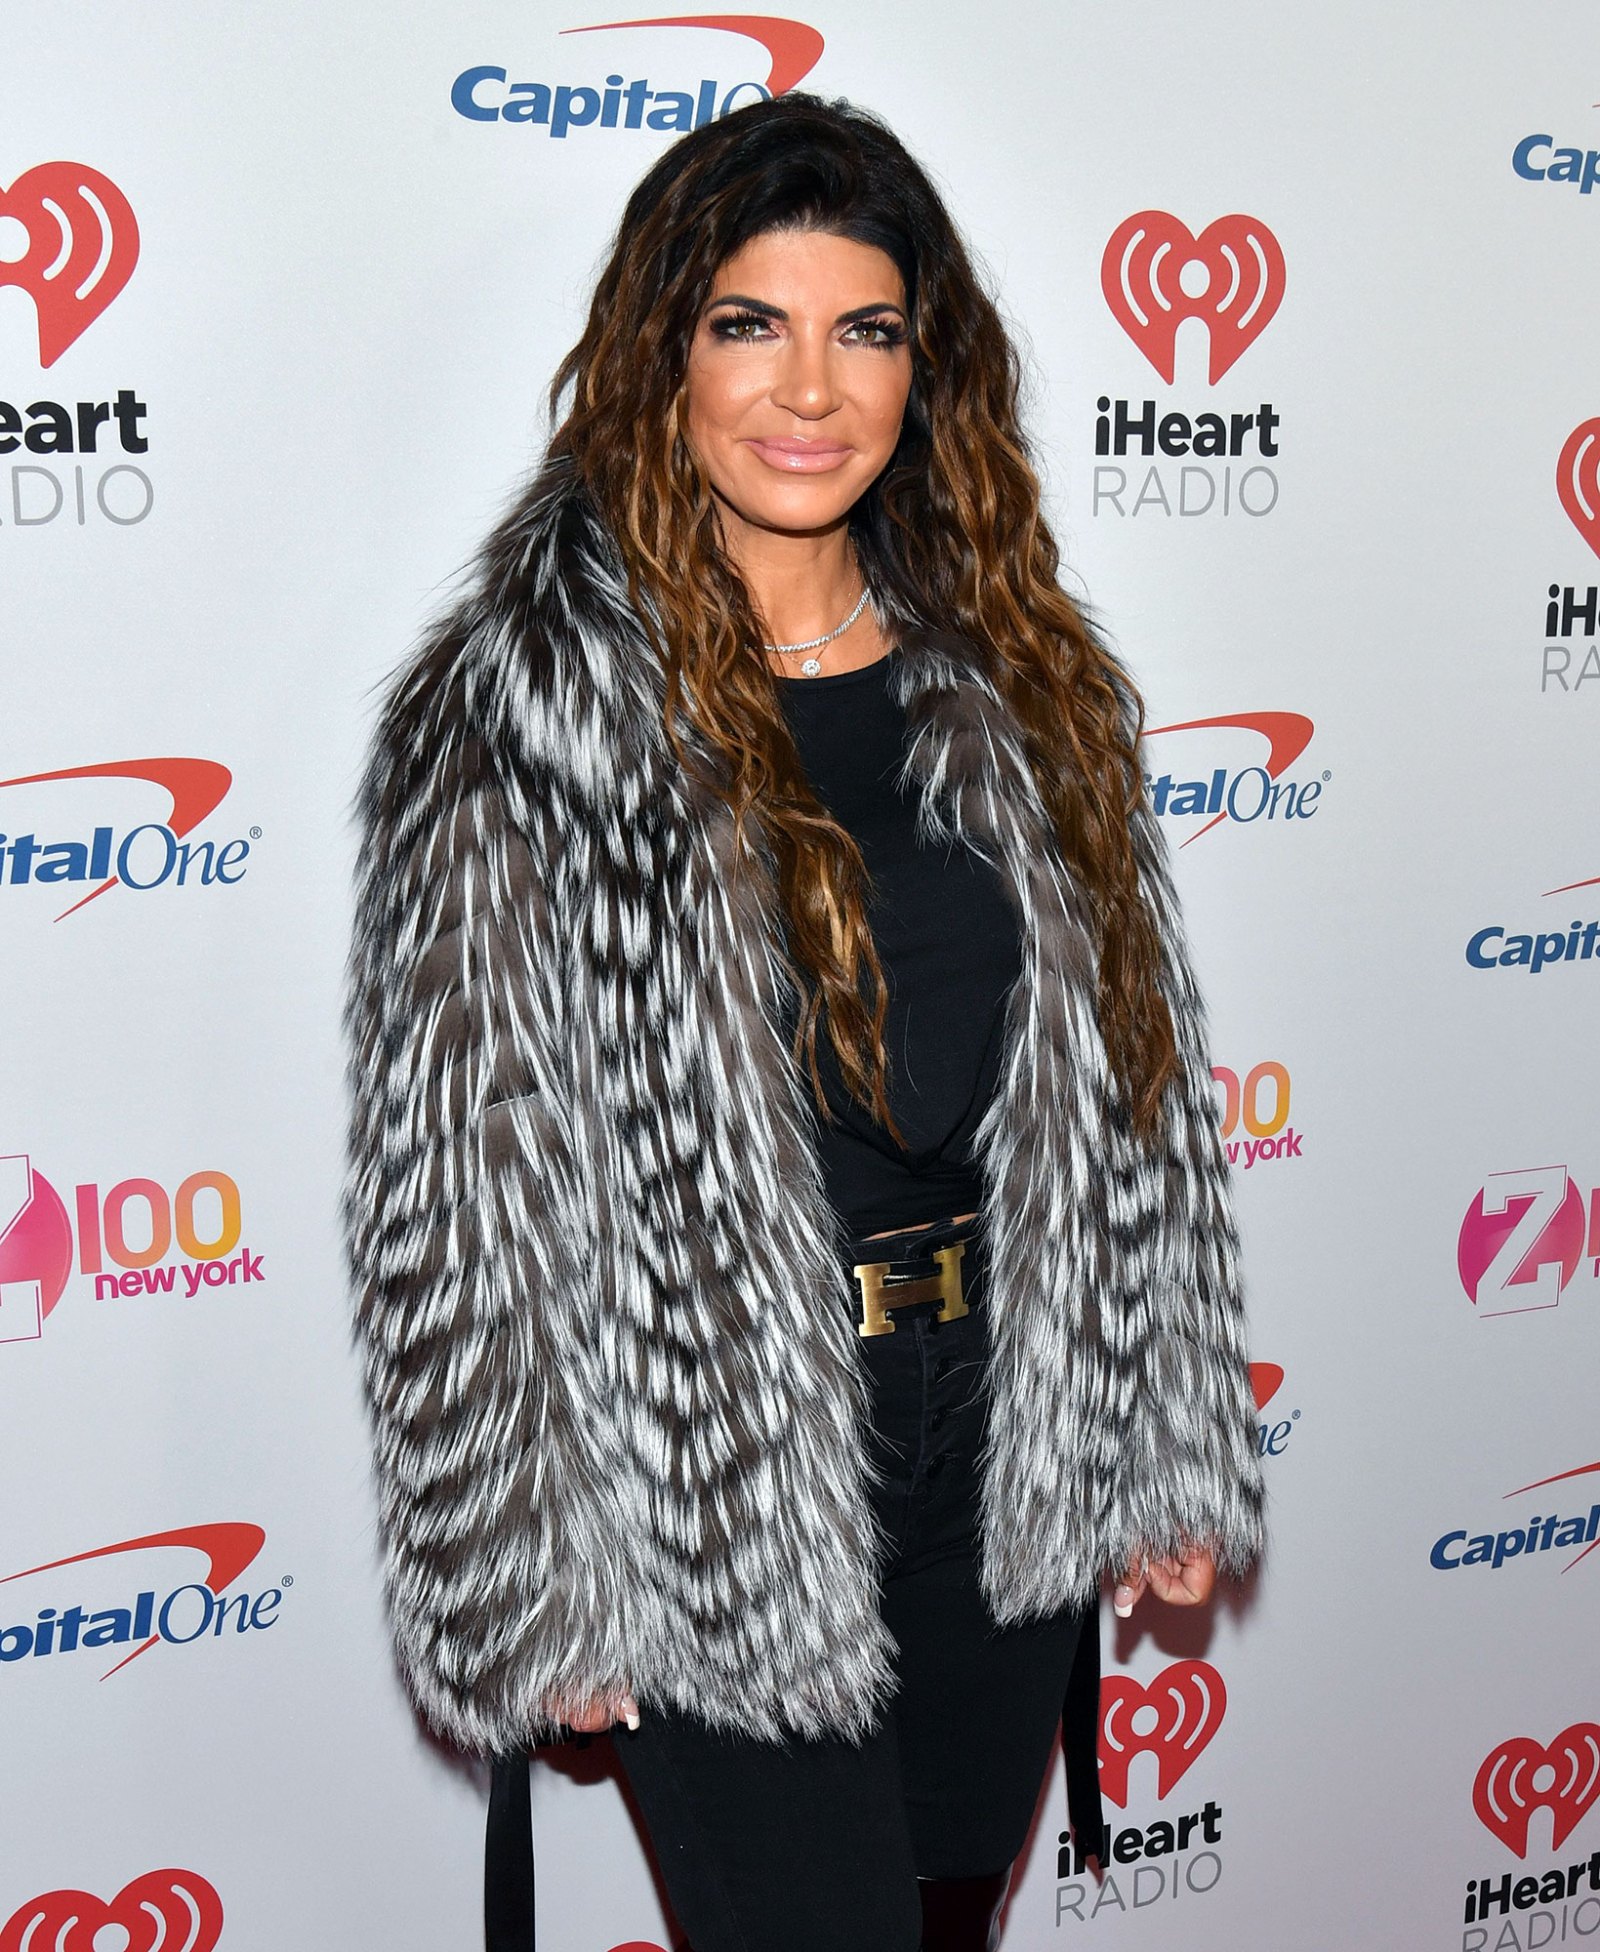 Teresa Giudice and Luis Ruelas: A Timeline of Their Relationship